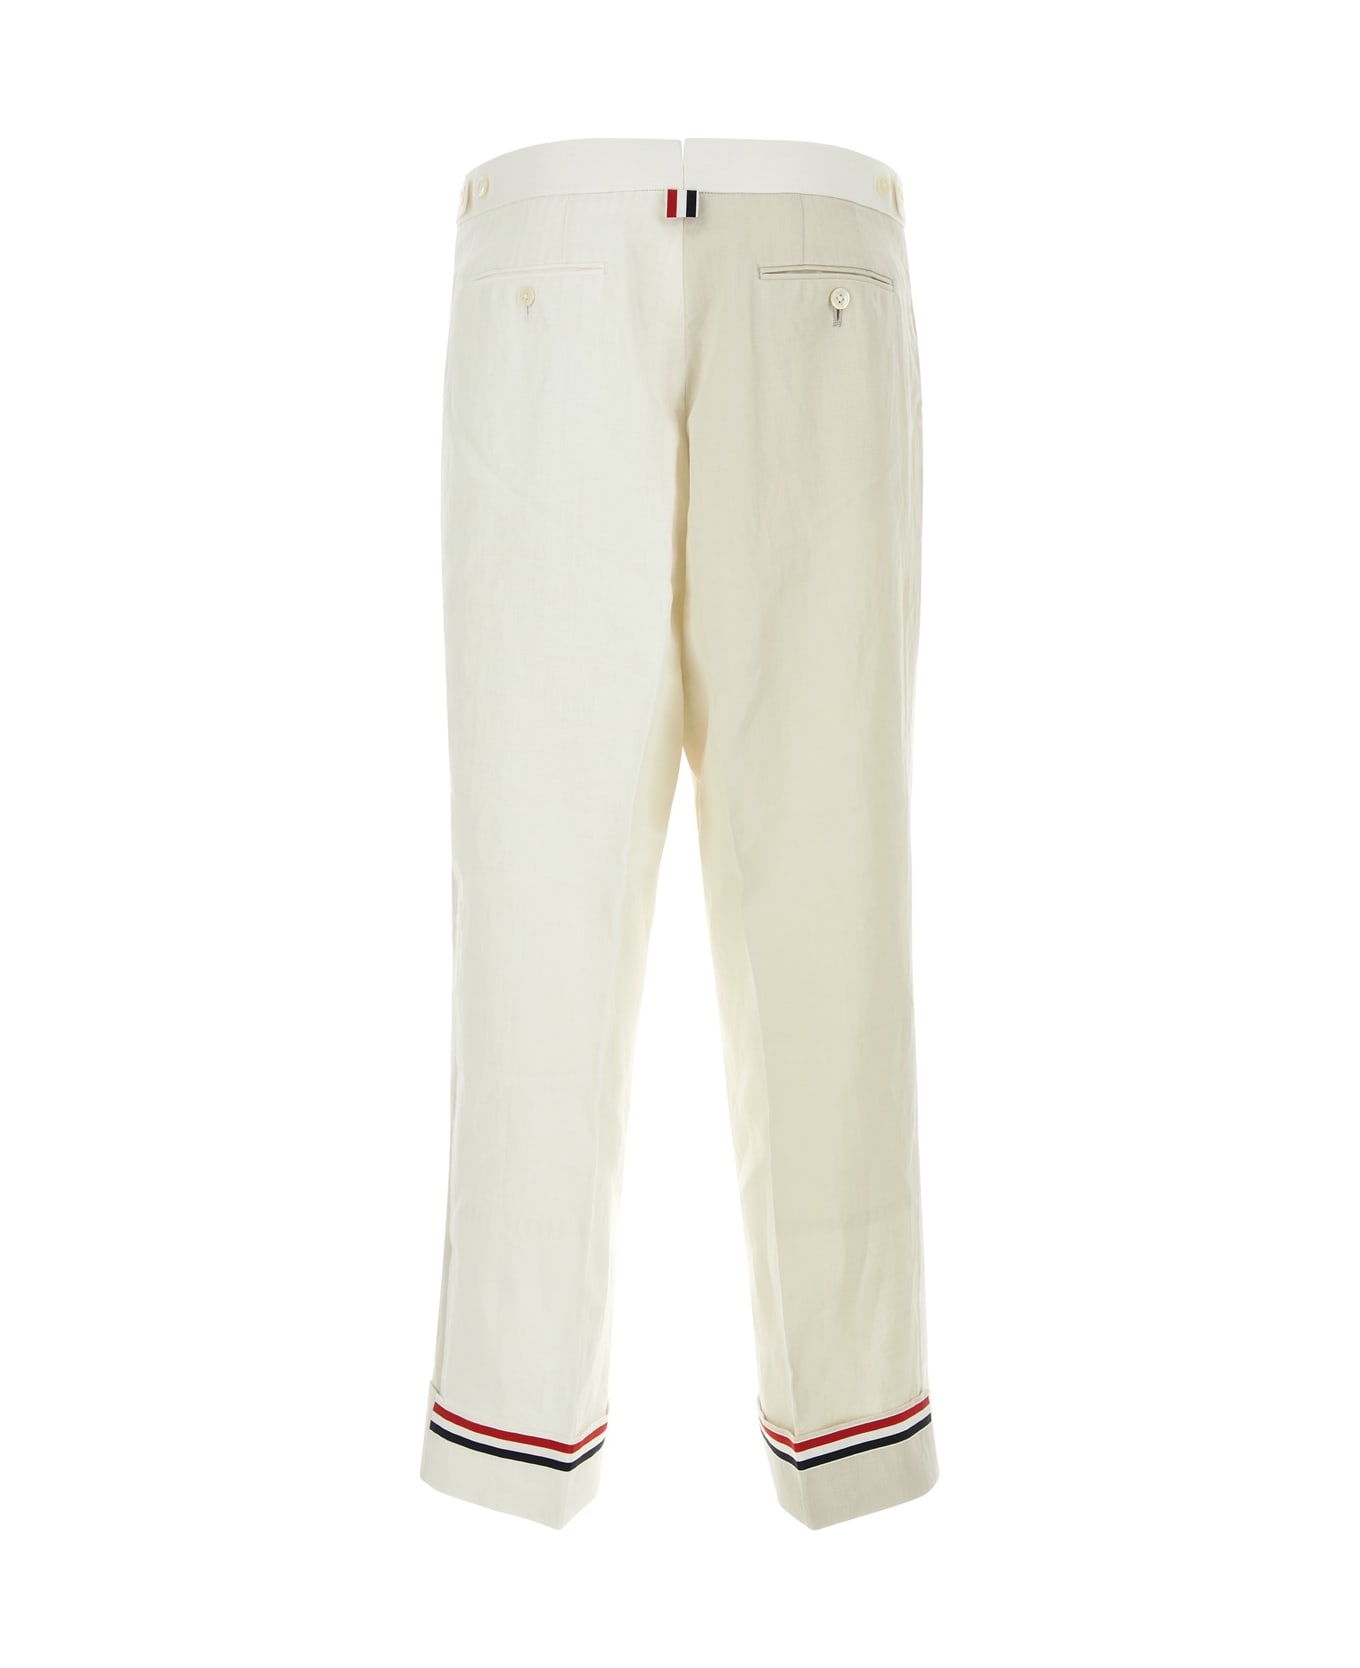 Thom Browne Two-tone Linen Pant - White ボトムス